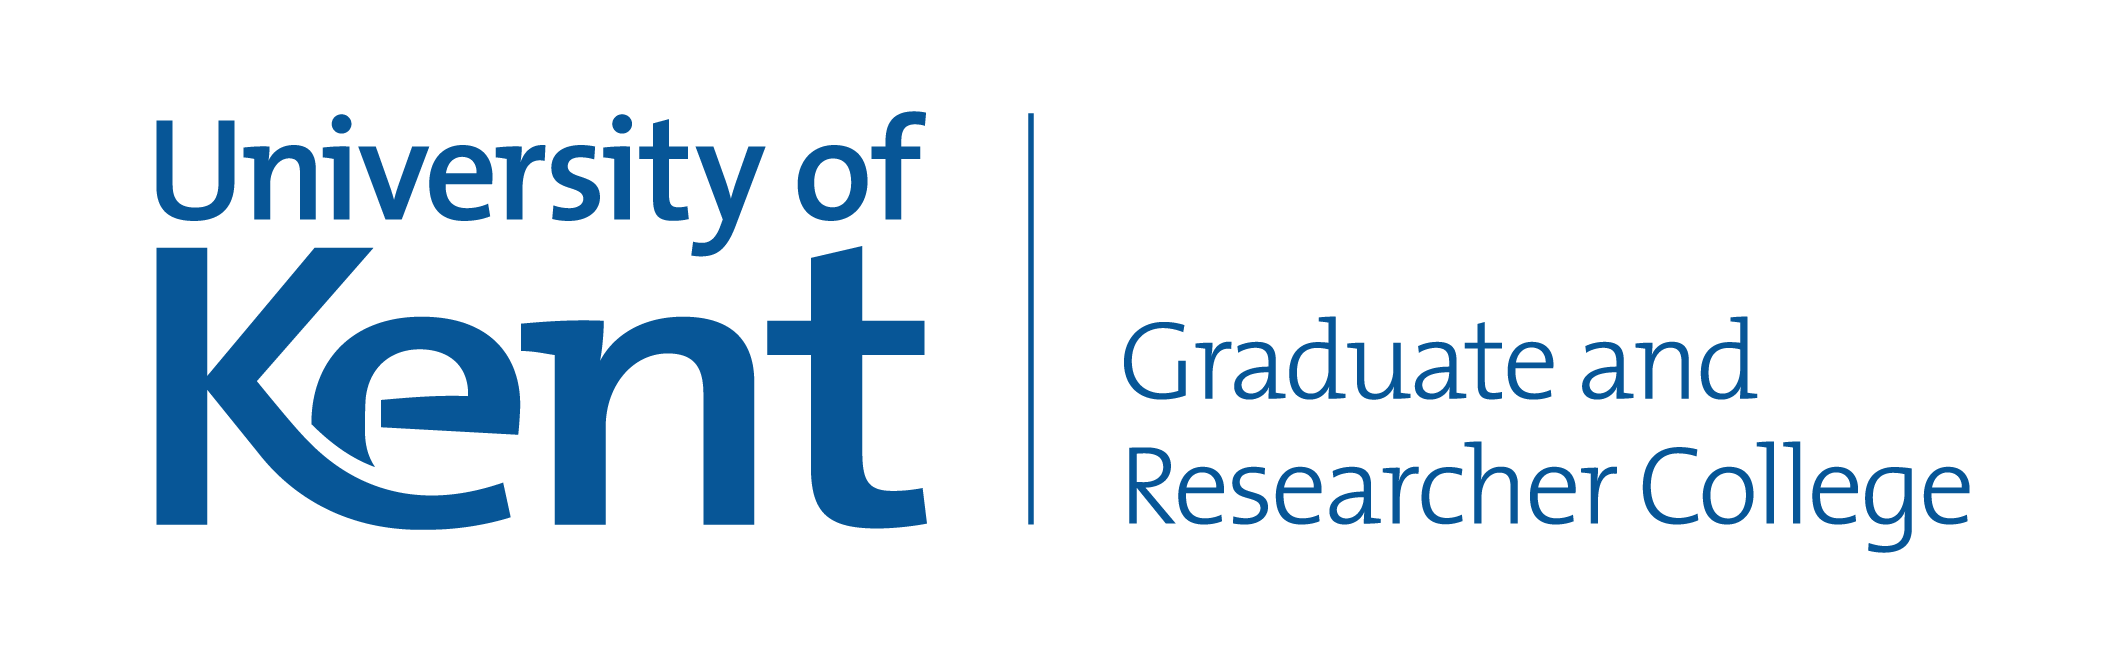 Blue logo: University of Kent Graduate and Researcher College